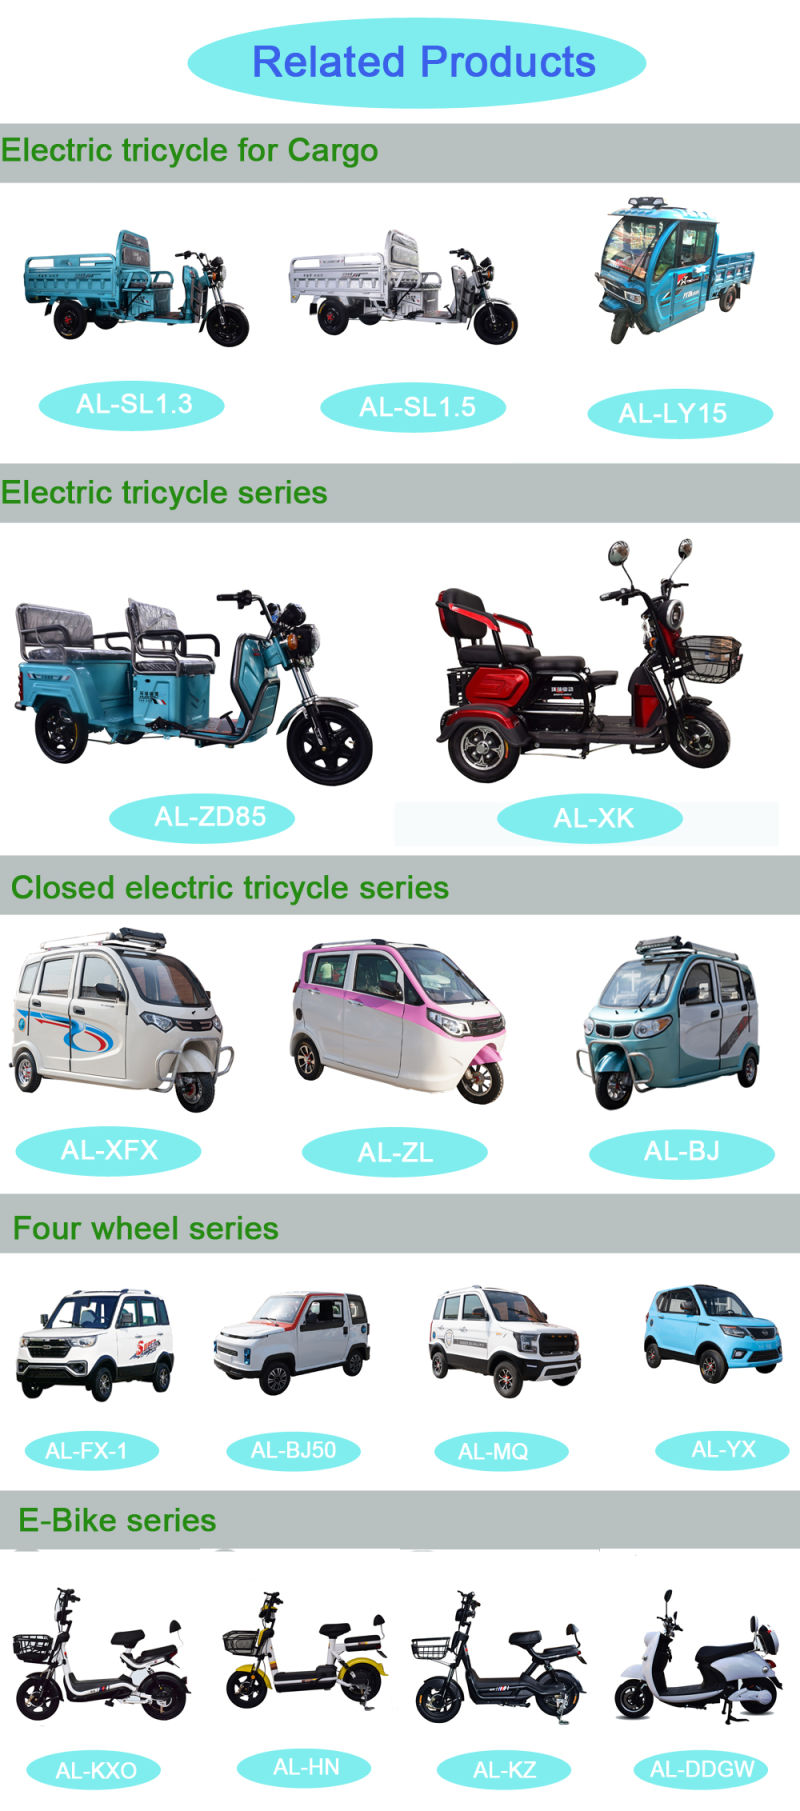 Al-Sk Mini Electric Cars Middle Hand Steering Rechargeable Electric Cars